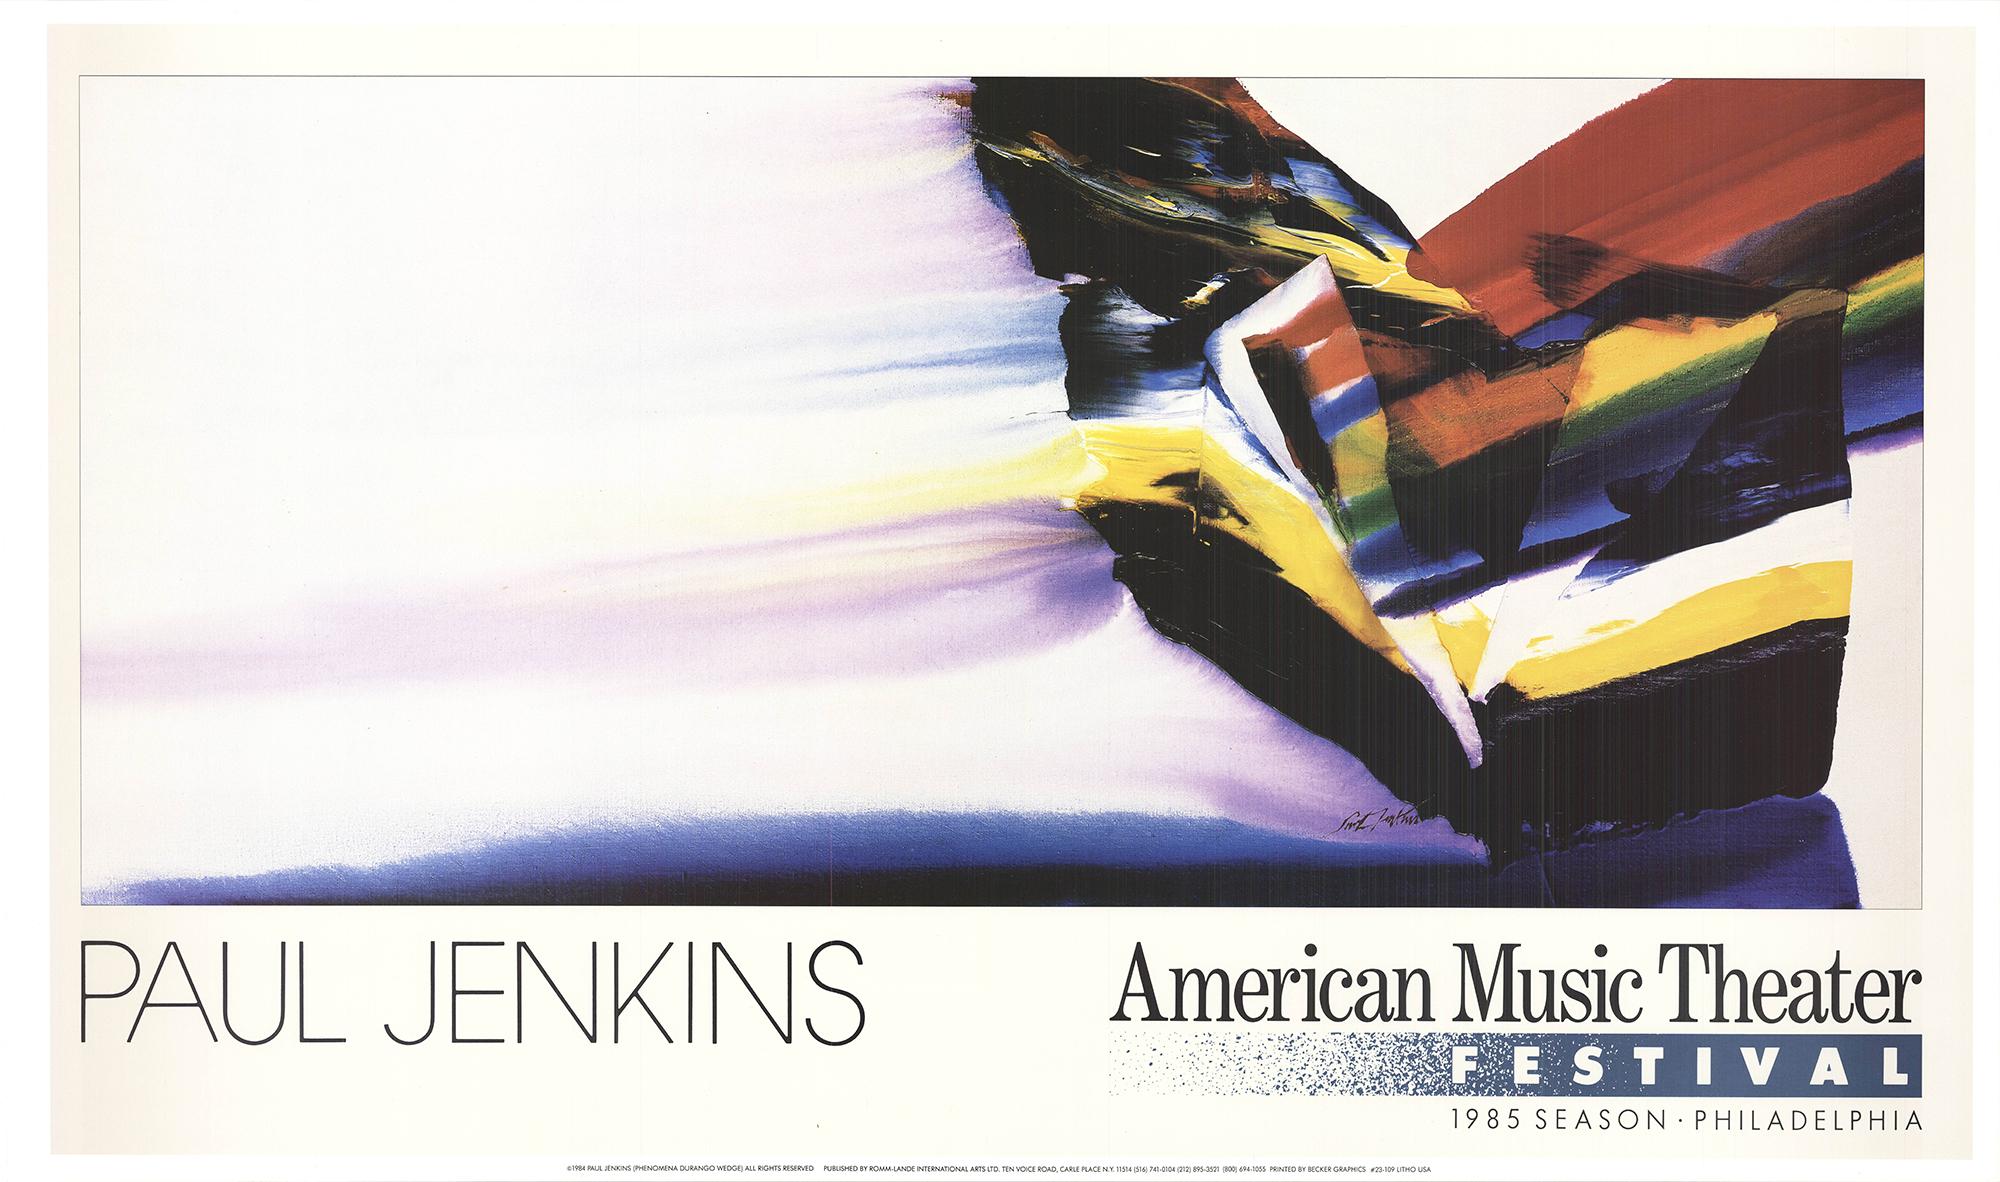 Poster created by Jenkins to advertise the 1985 American Music Theater Festival.